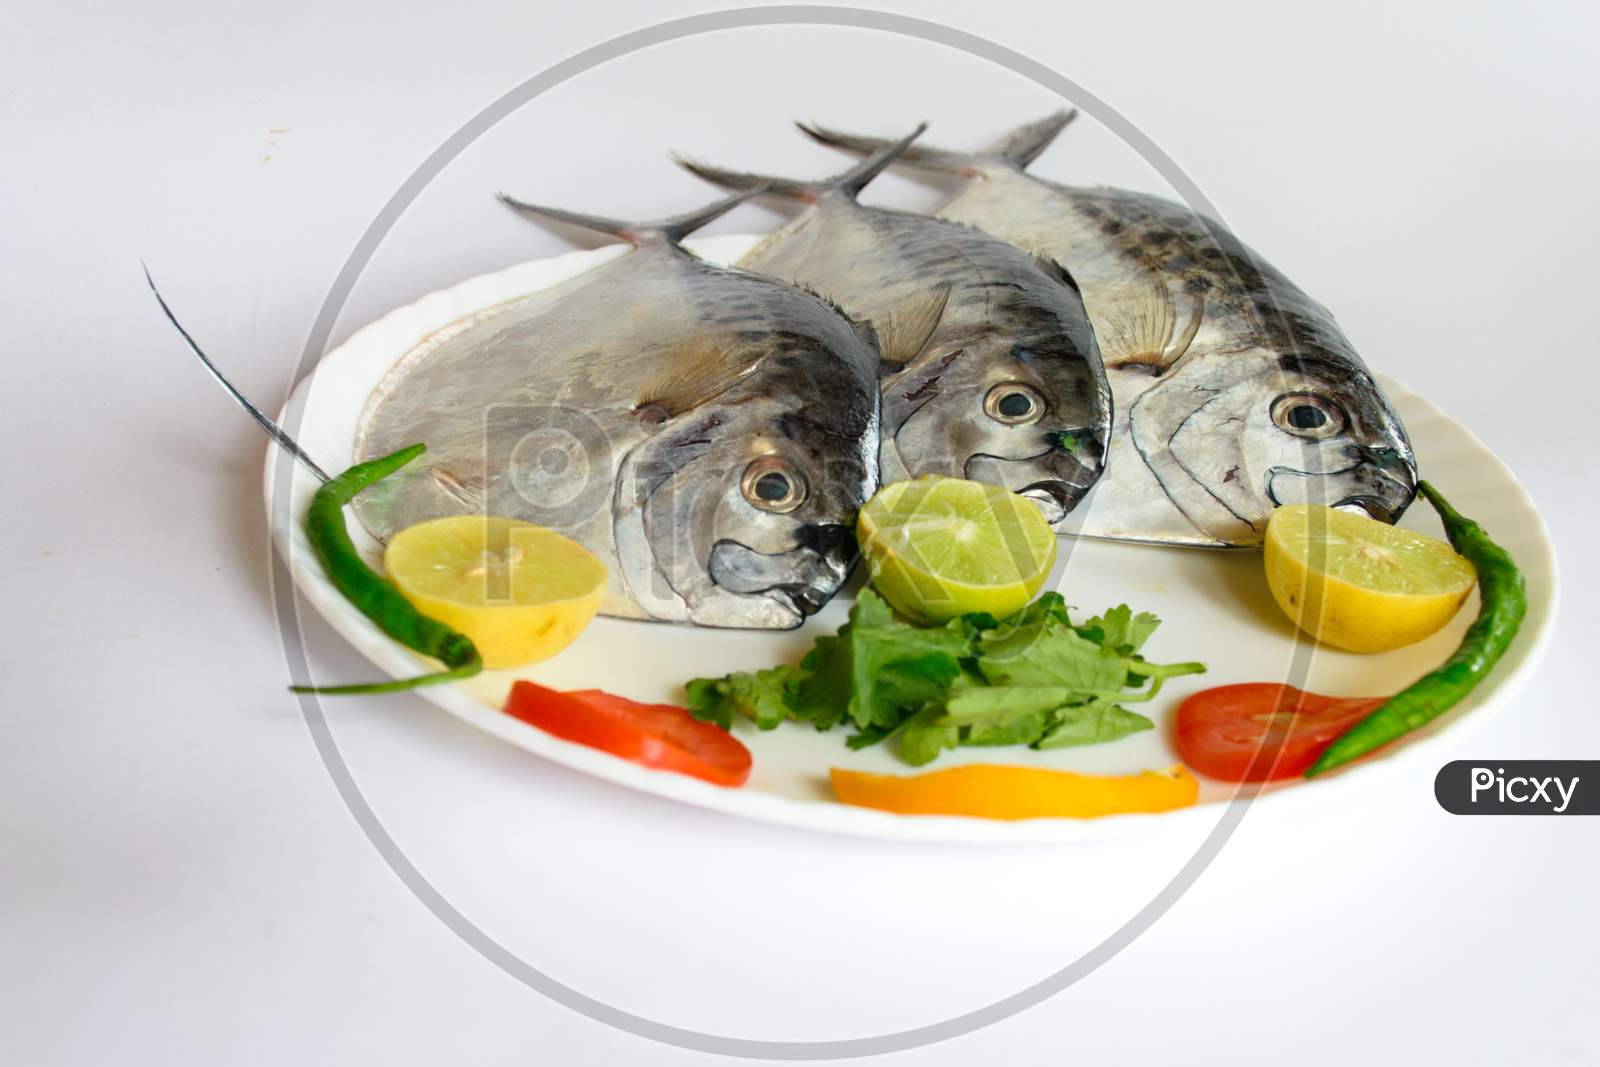 Fresh Razor Moonfish/Razor Trevally Fish, Decorated With Herbs And Lemon Slice On A White Plate.